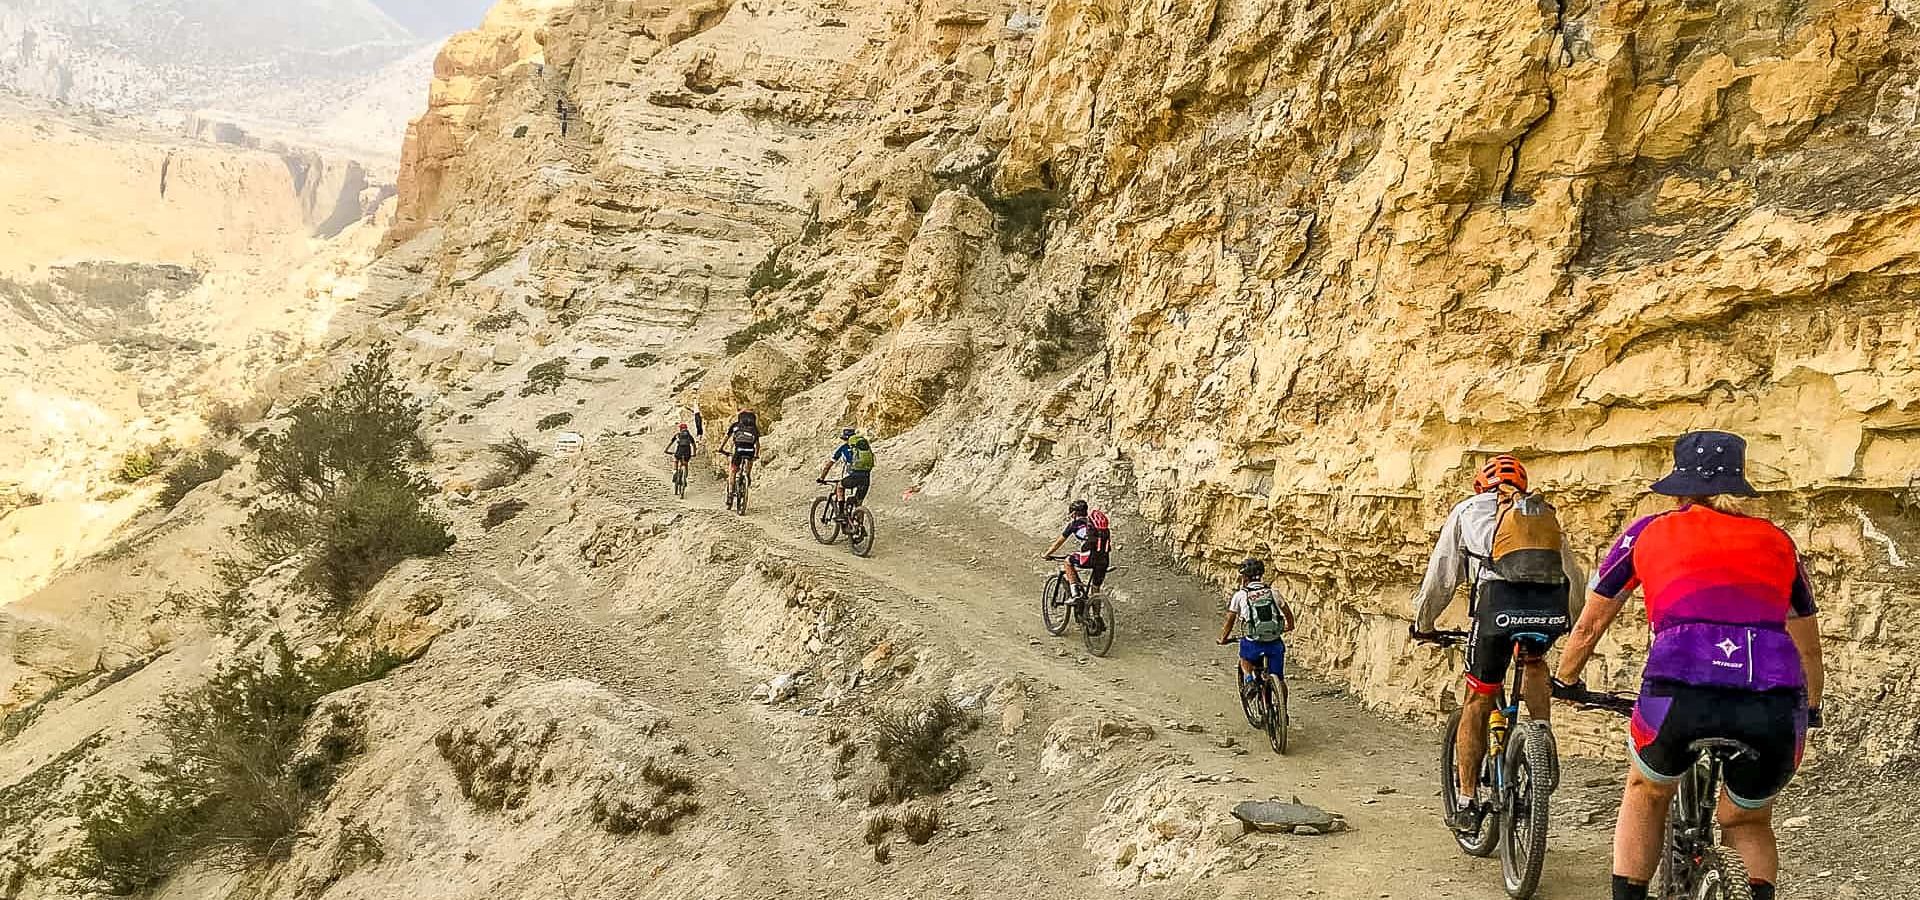 Upper Mustang Cycling Tour